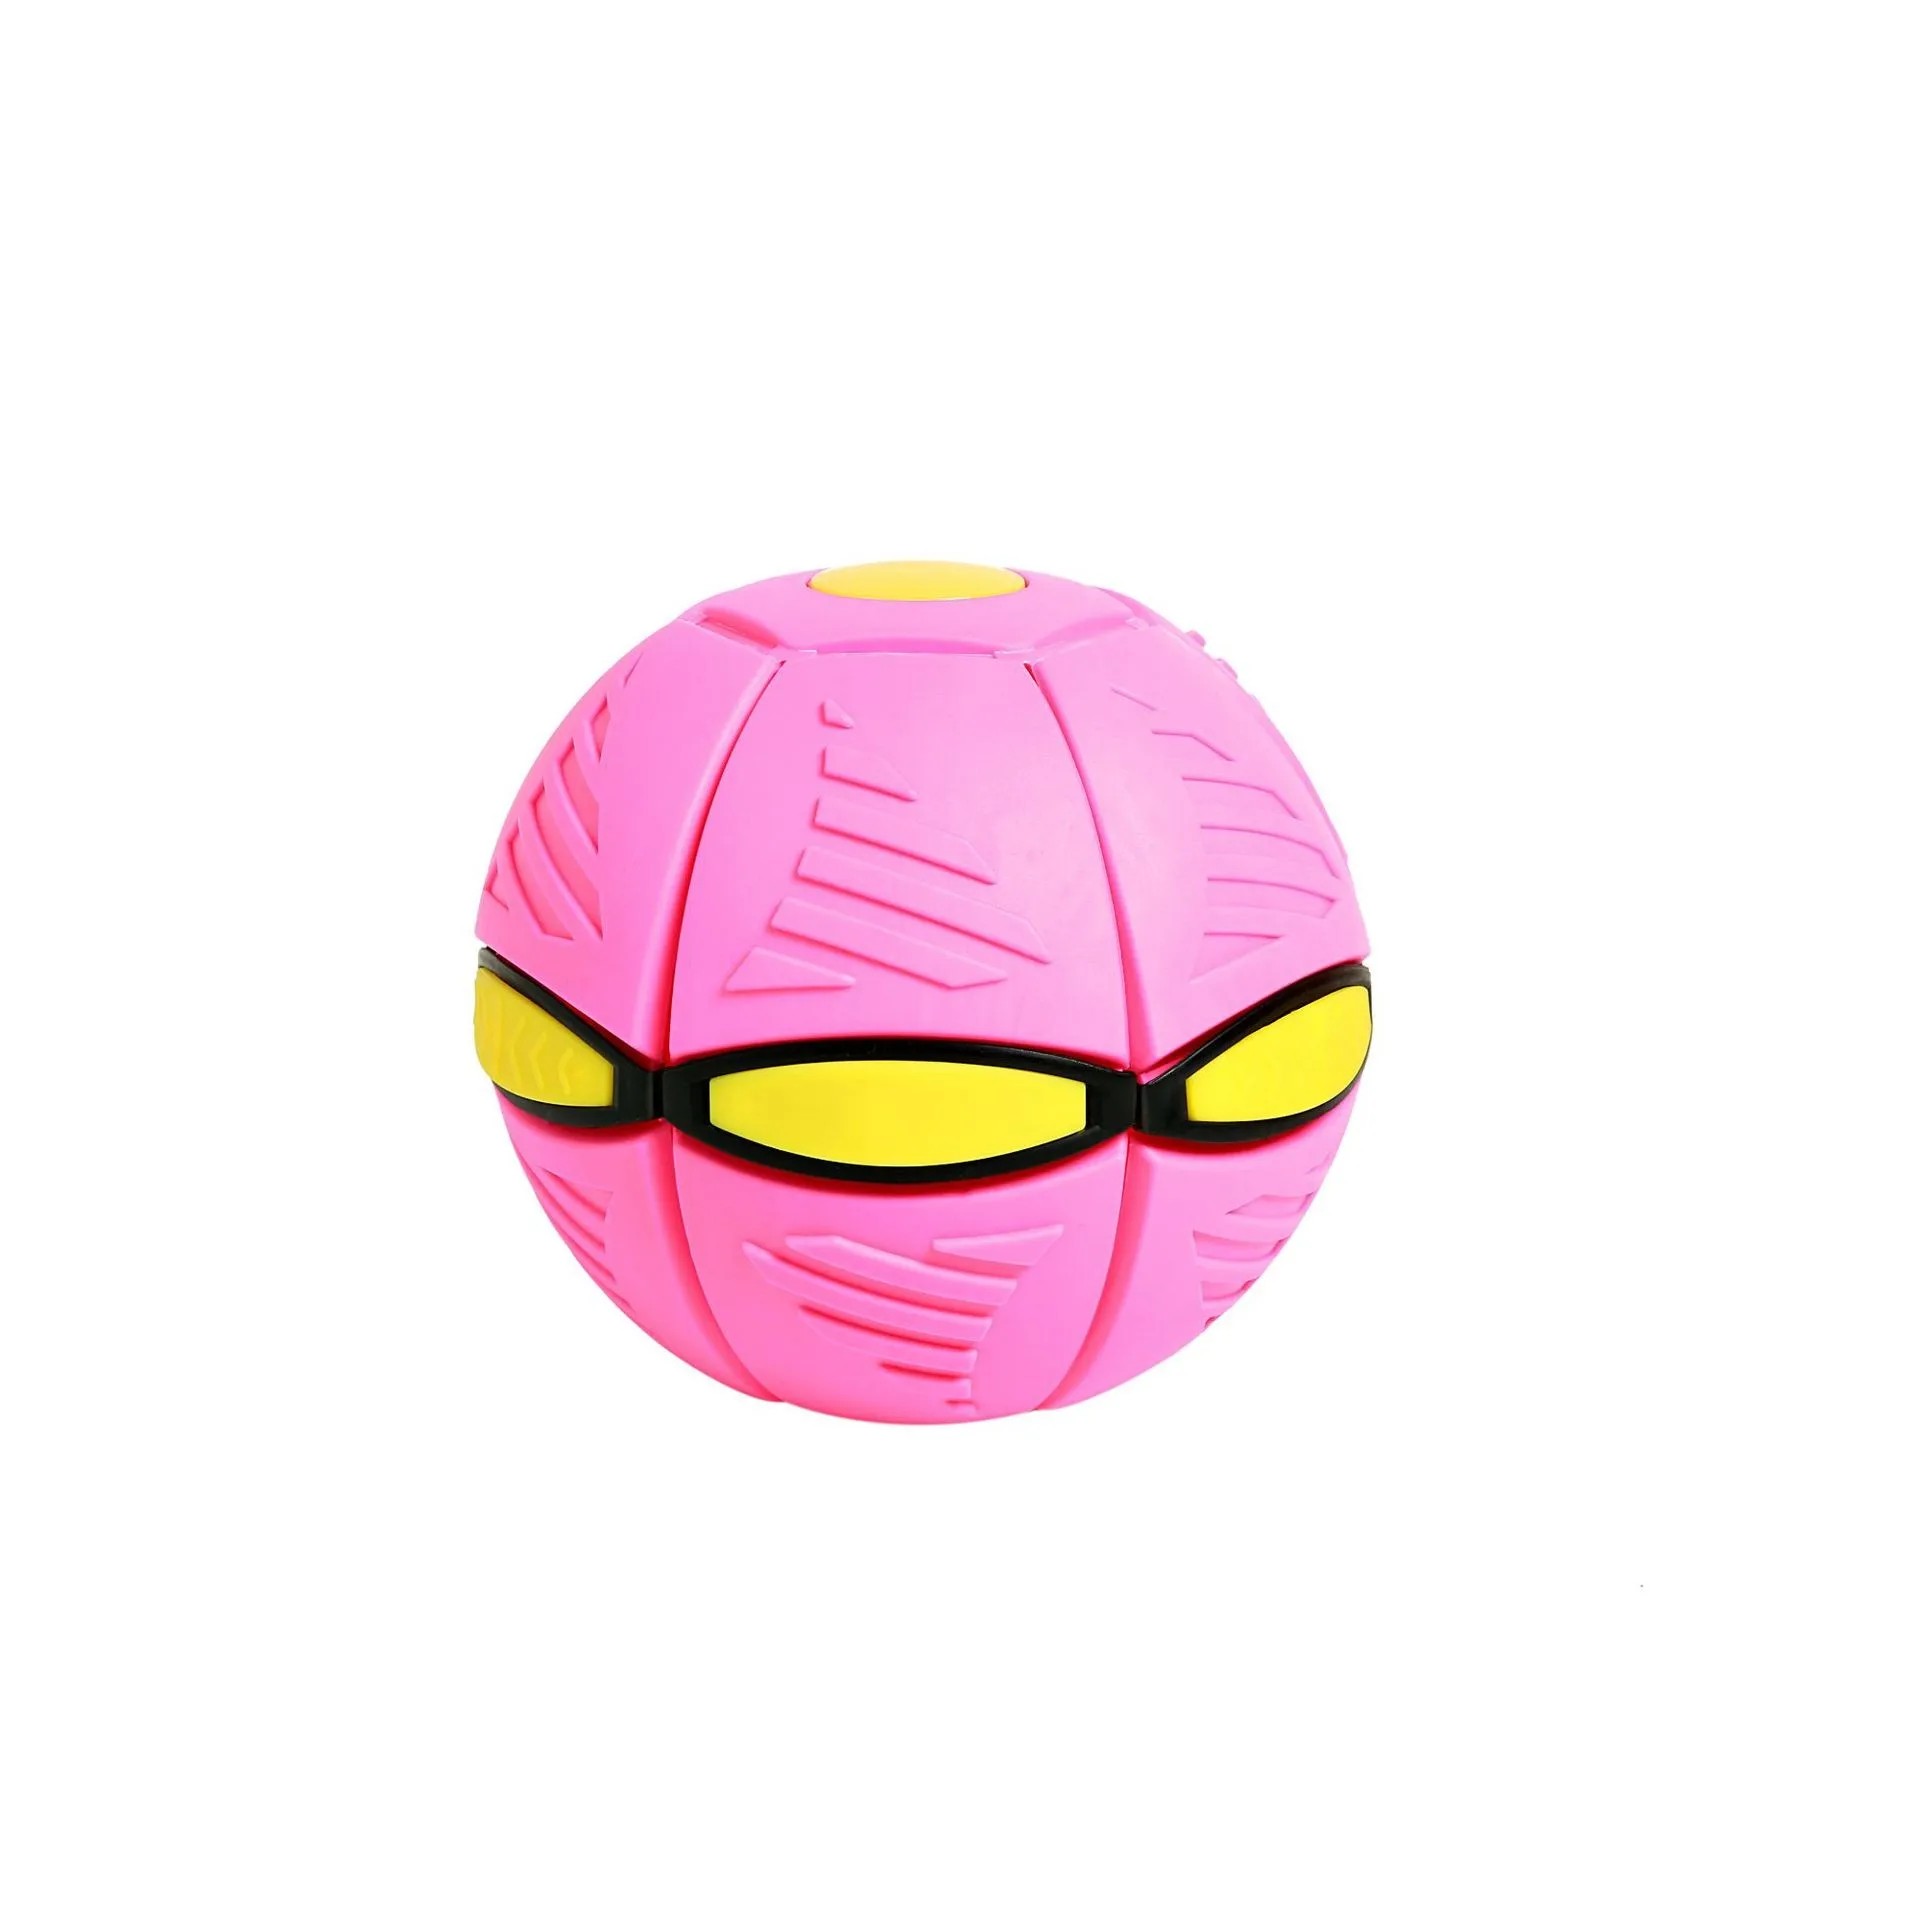 Flying UFO Flat Throw Disc Ball With Light Stress ball Soccer Toy for Kid Outdoor Garden Beach Game Children's sports balls toys images - 6